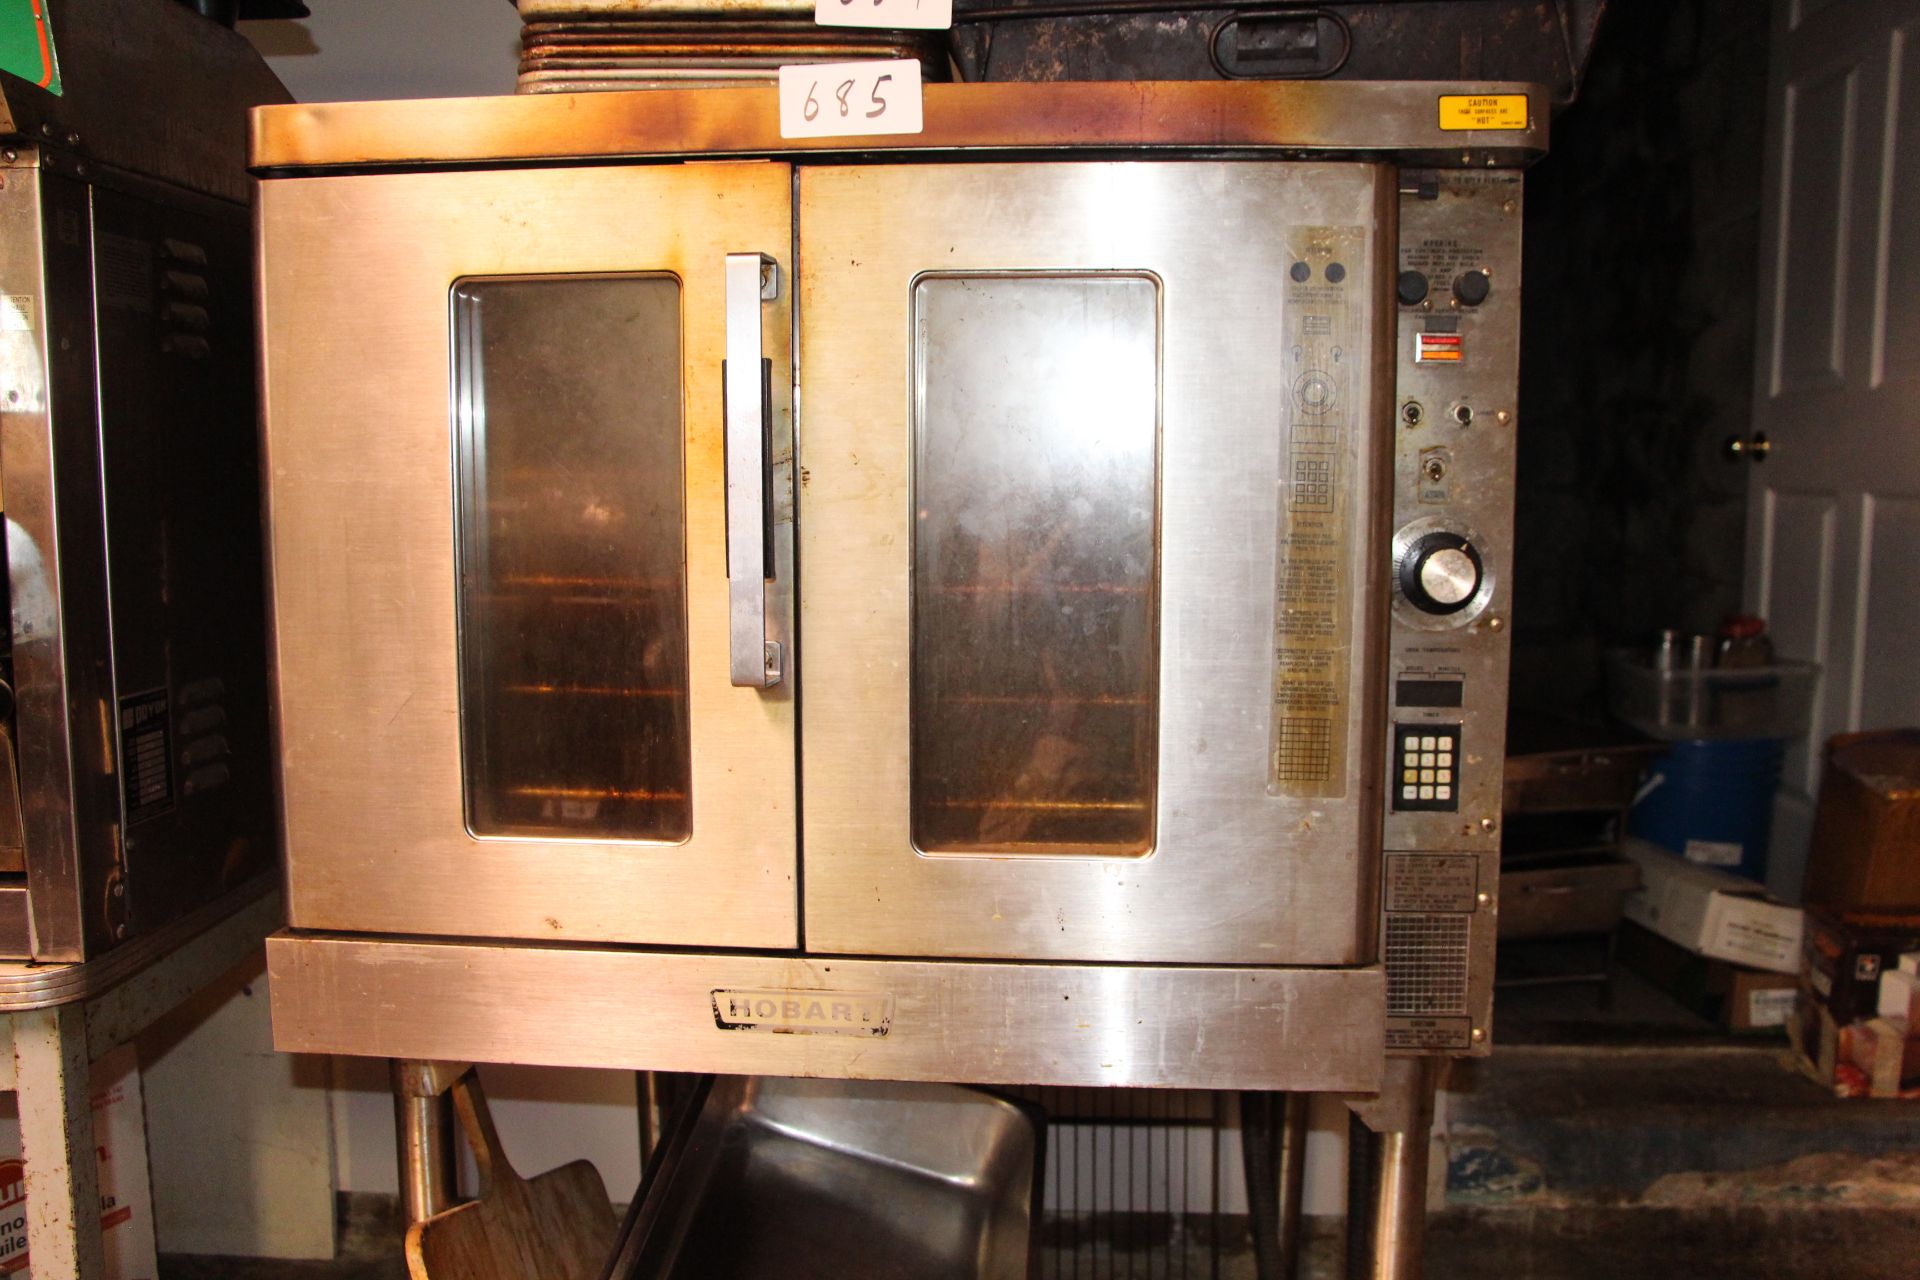 Hobart electric convection oven